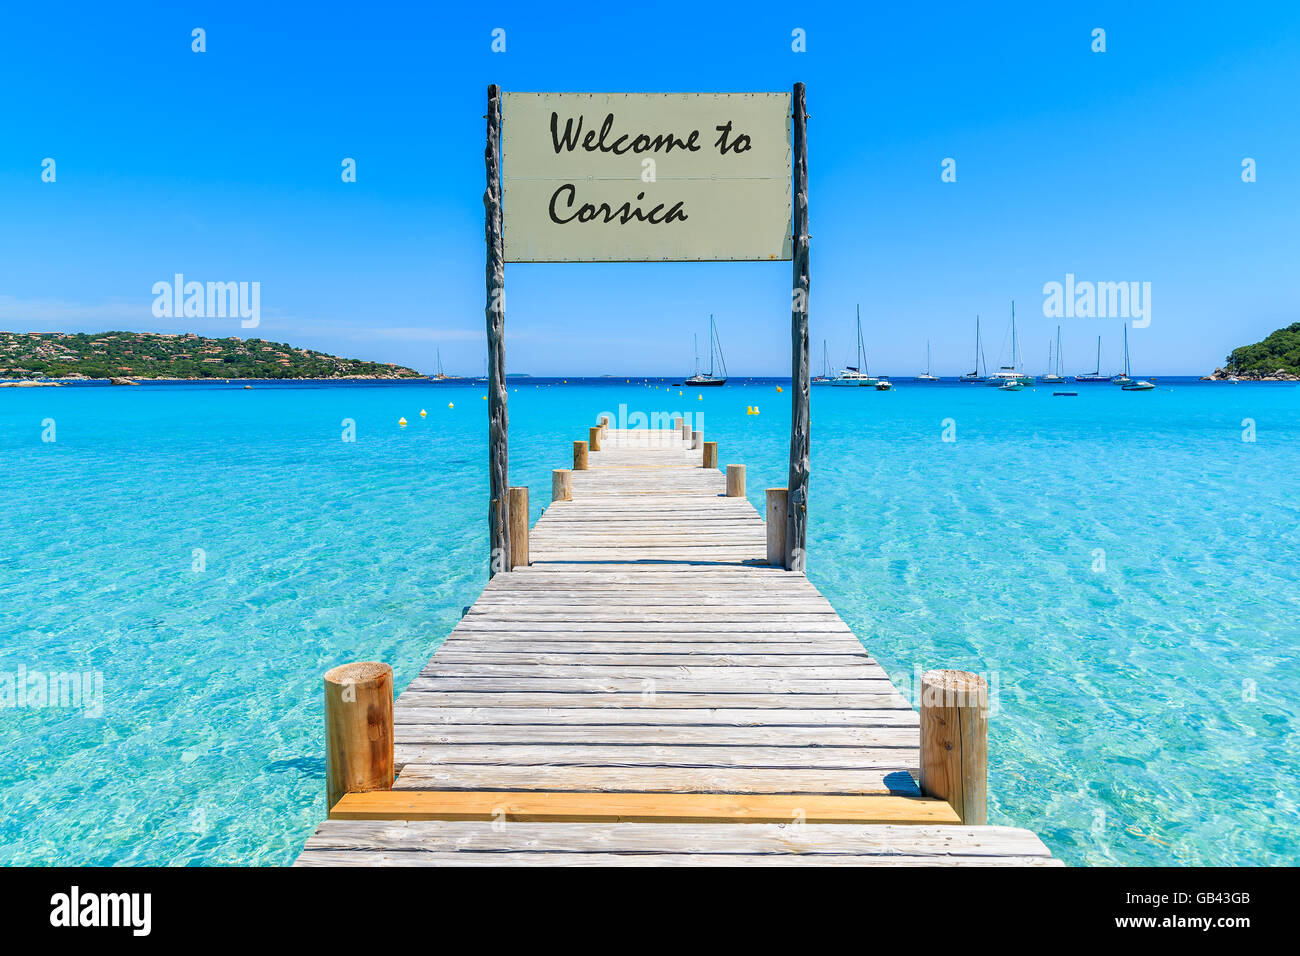 Sign on wooden jetty on Santa Giulia beach with words 'Welcome to Corsica' greeting painted on board, Corsica island, France Stock Photo